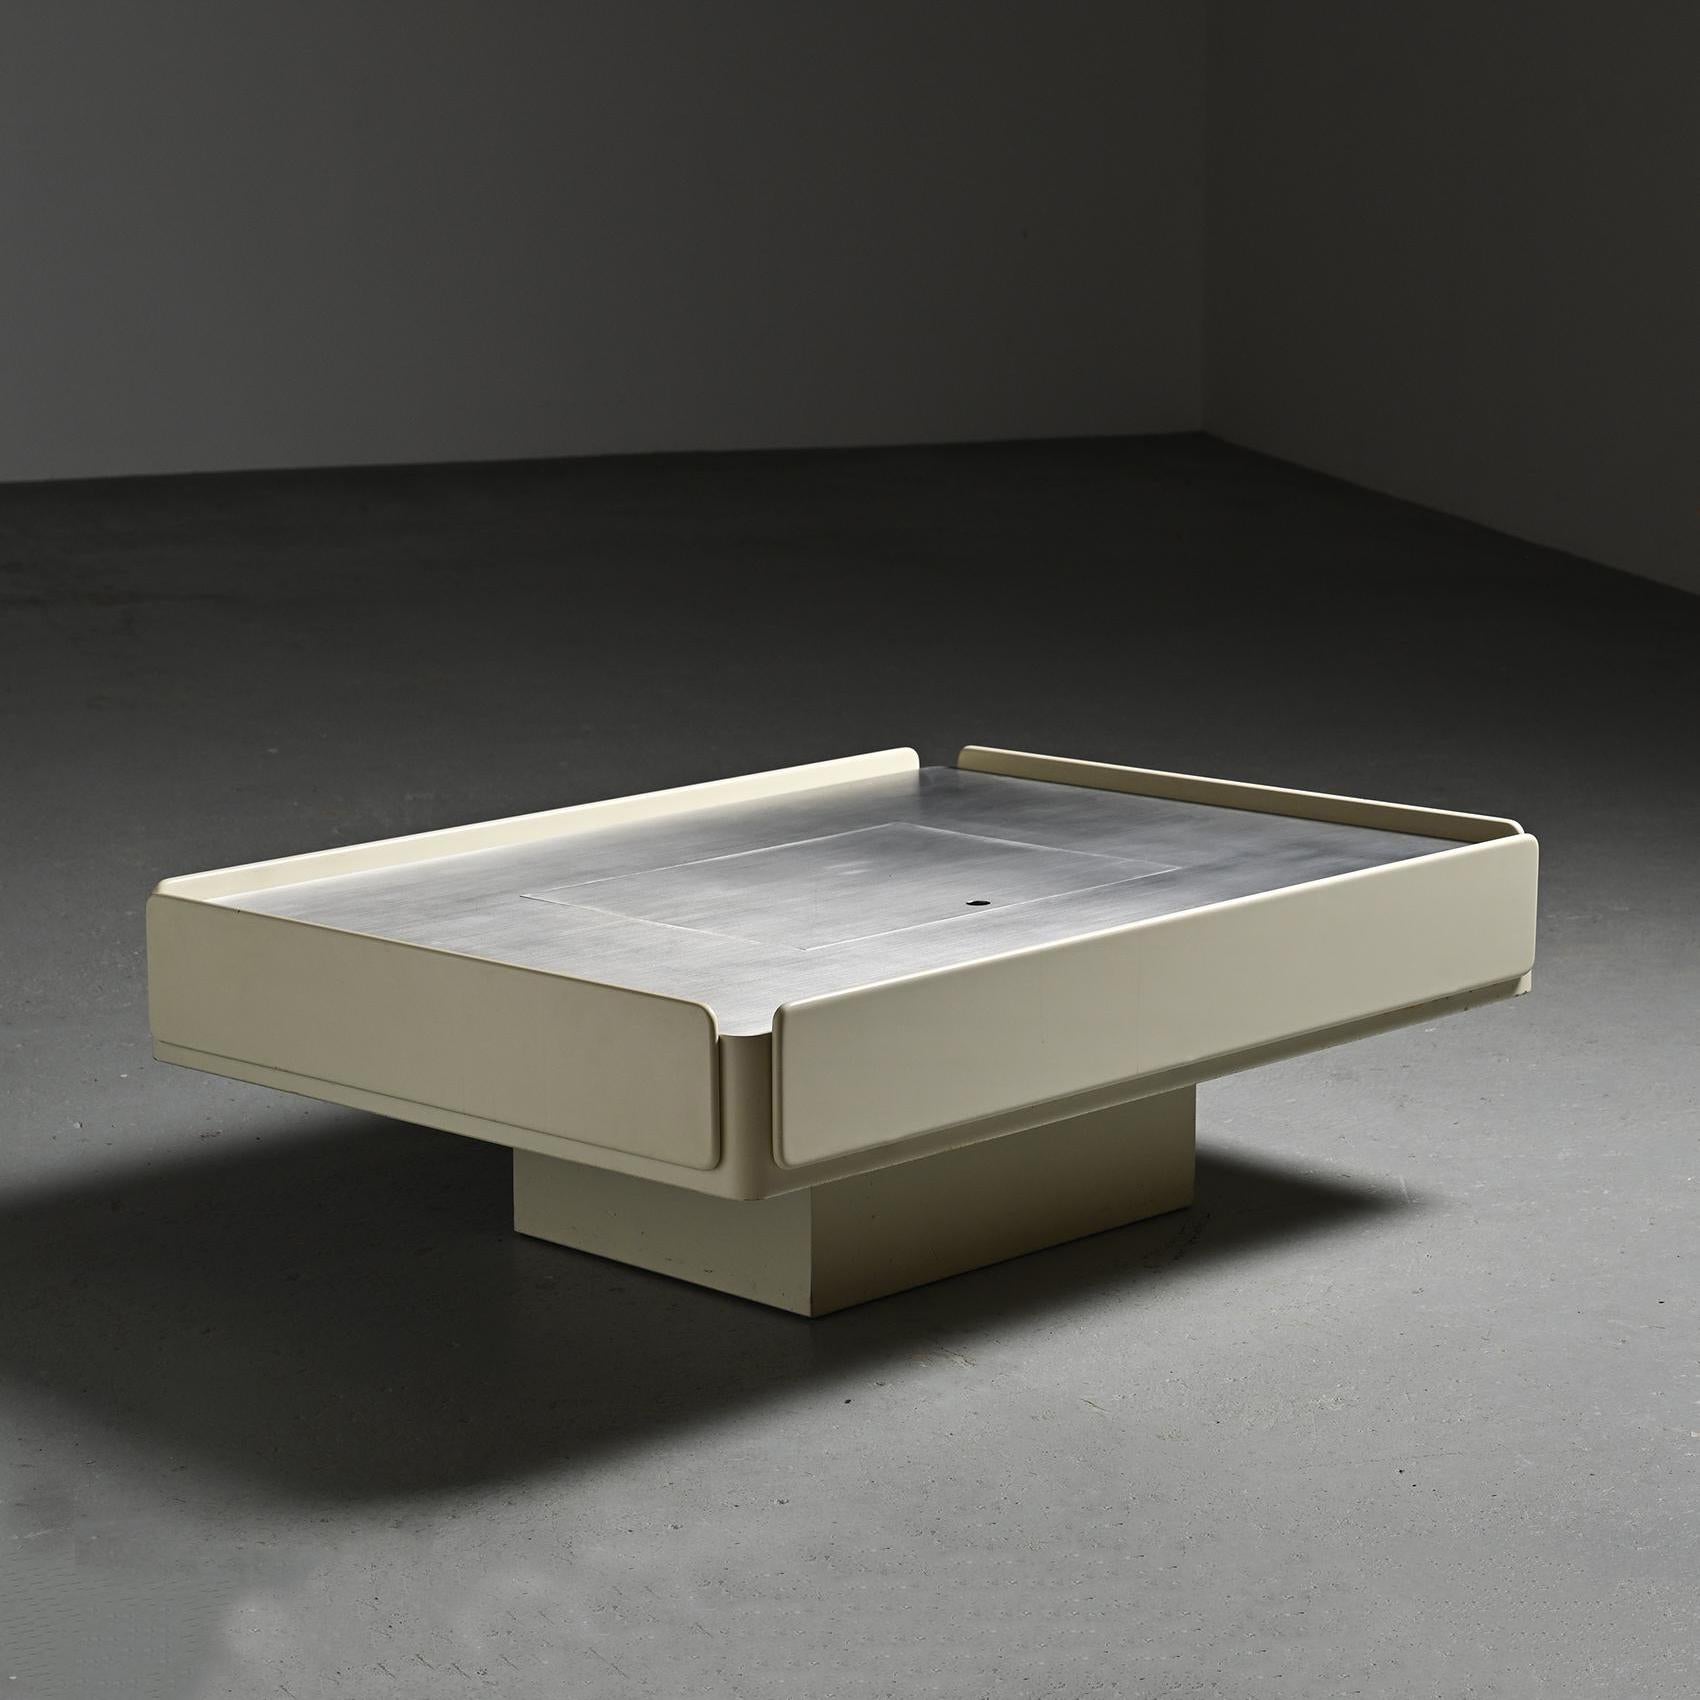 
A coffee table known as the Caori model, envisioned by Italian designer Vico Magistretti in the 1960s.

The structure, crafted from white lacquered wood, elegantly houses a spacious rectangular aluminum tabletop. This tabletop is adorned with a